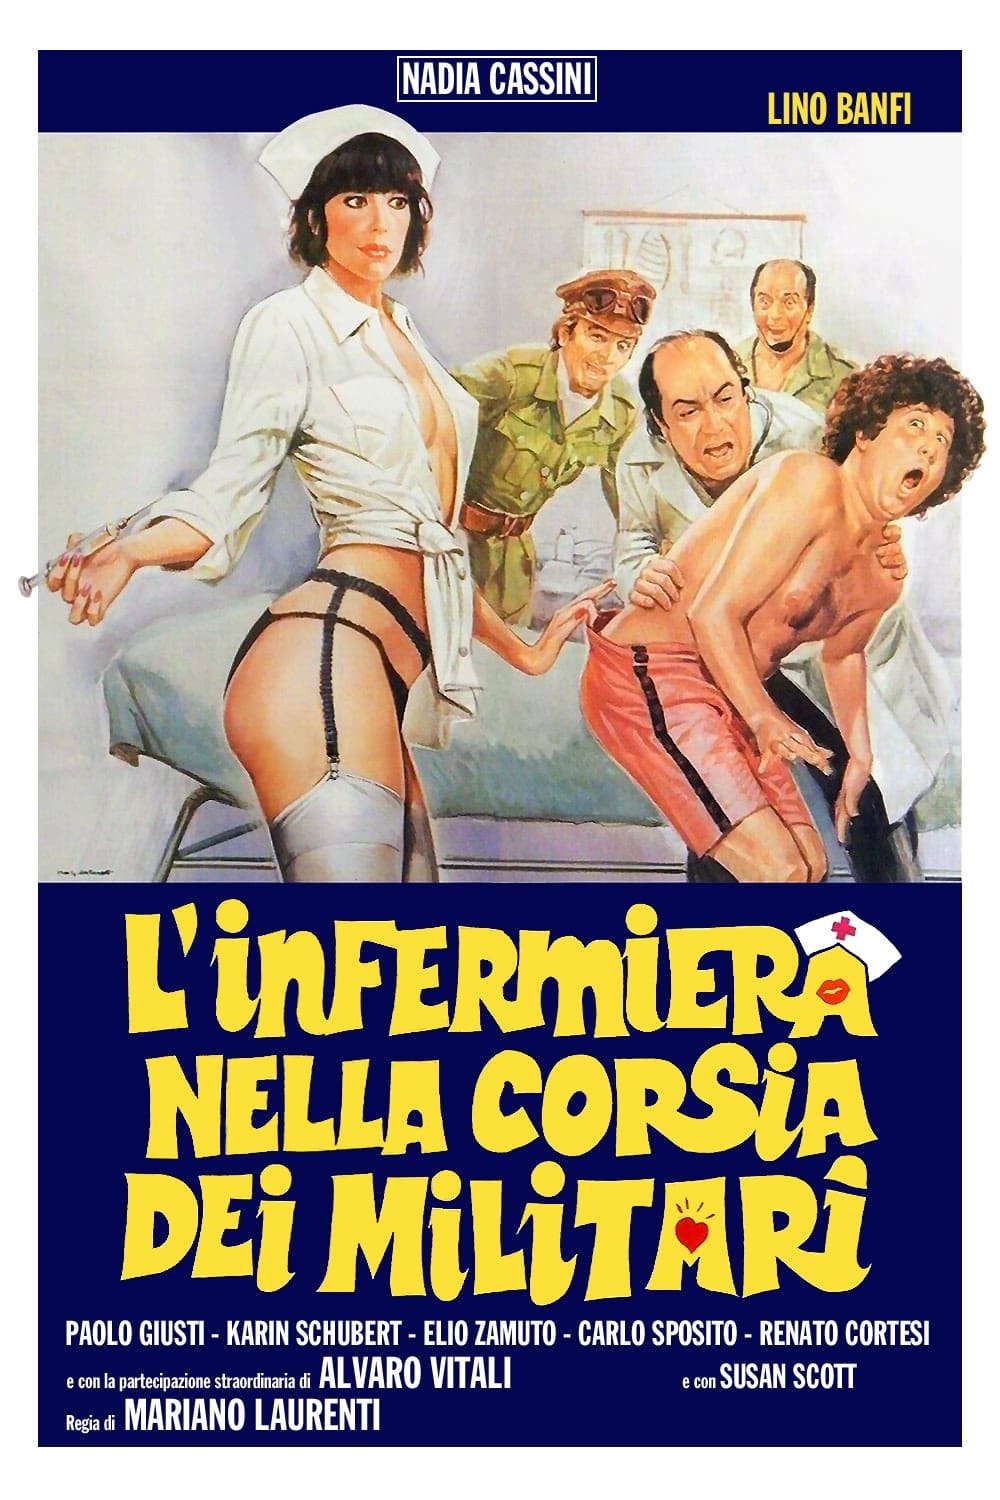 The Nurse in the Military Madhouse (1979)